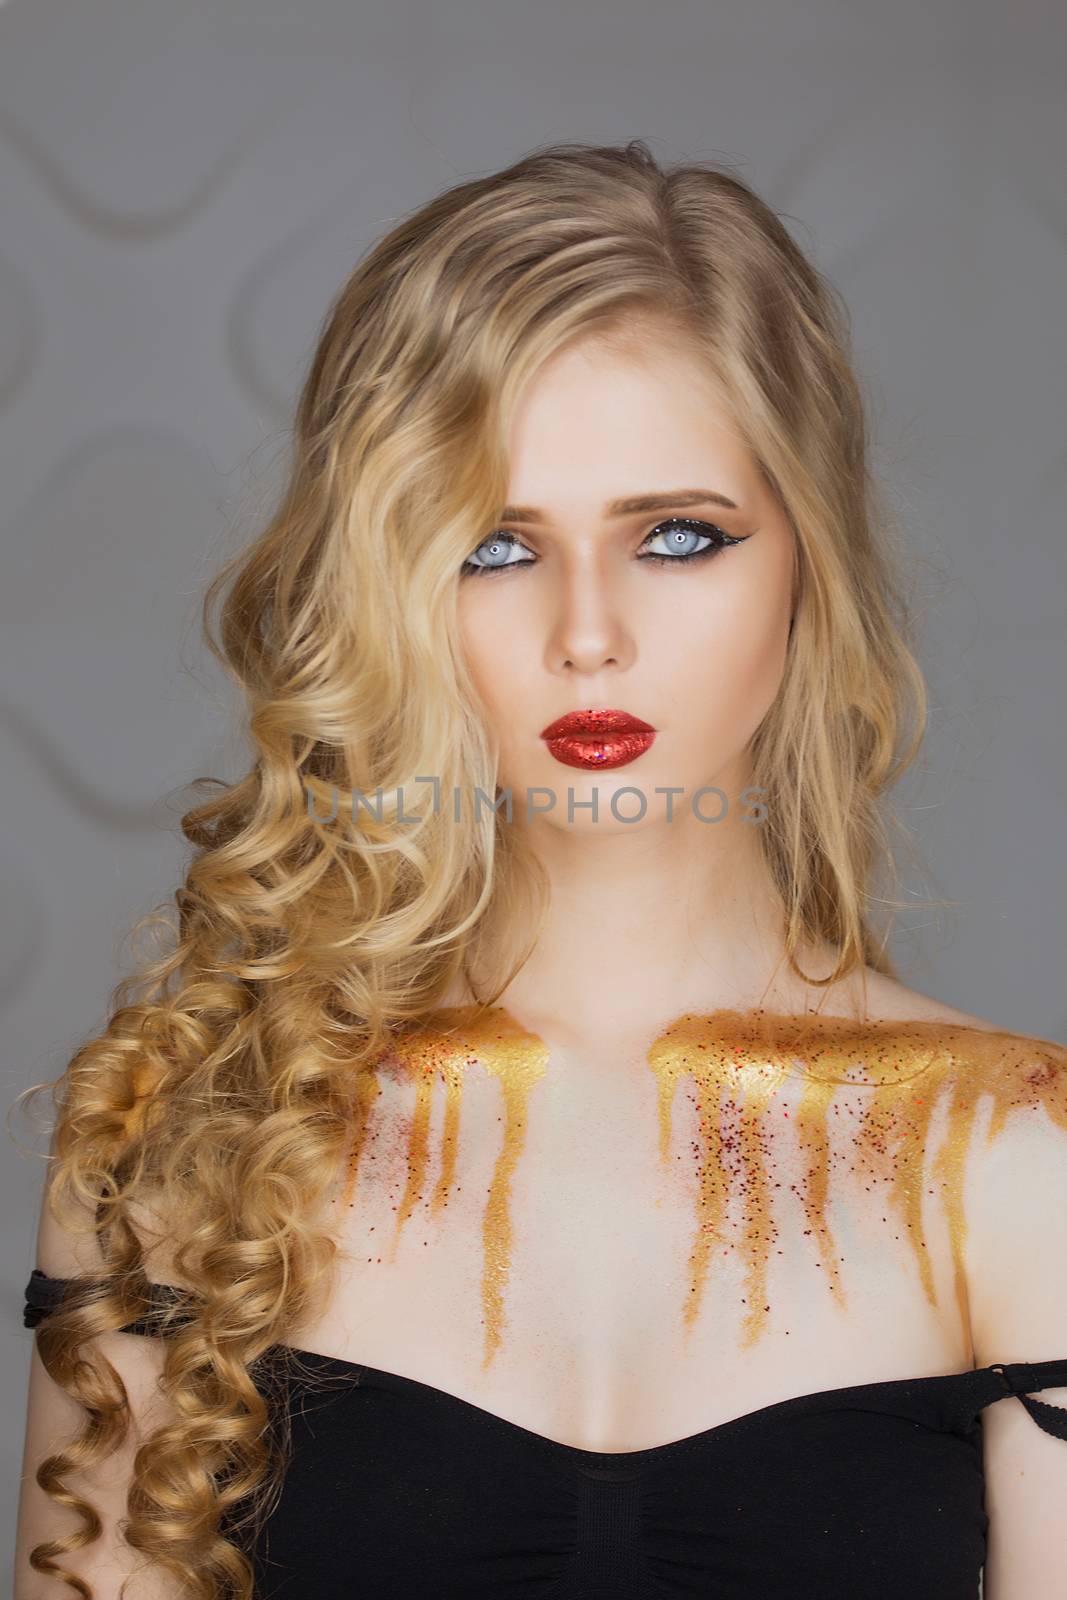 Fashion makeup. Woman with colorful makeup and body art.